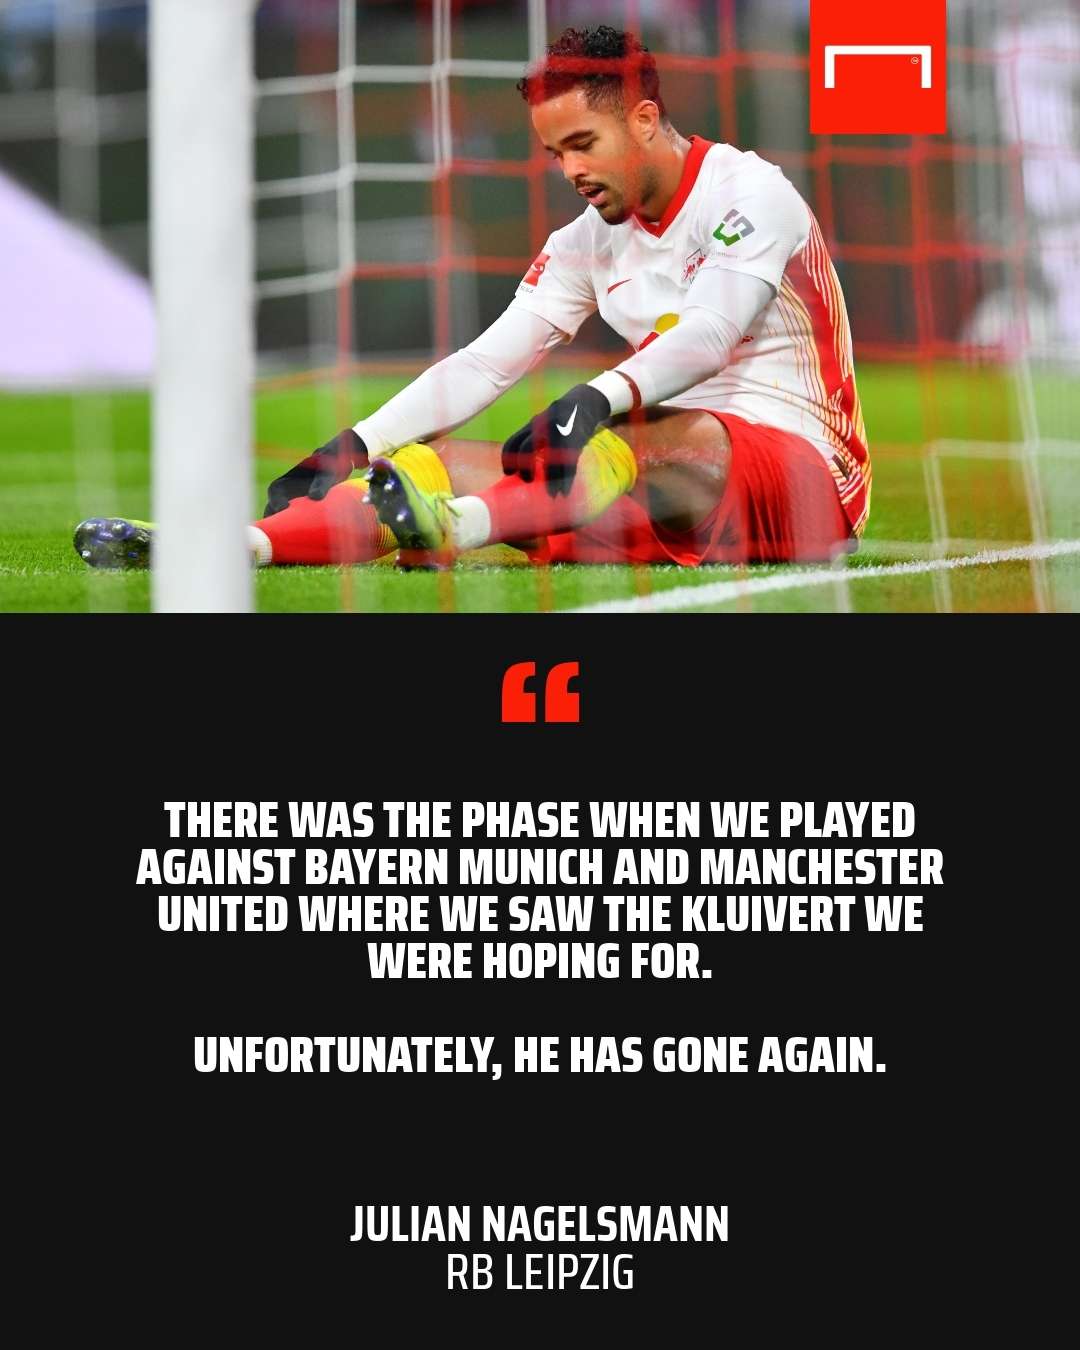 Justin Kluivert Nagelsmann RB Leipzig quote GFX